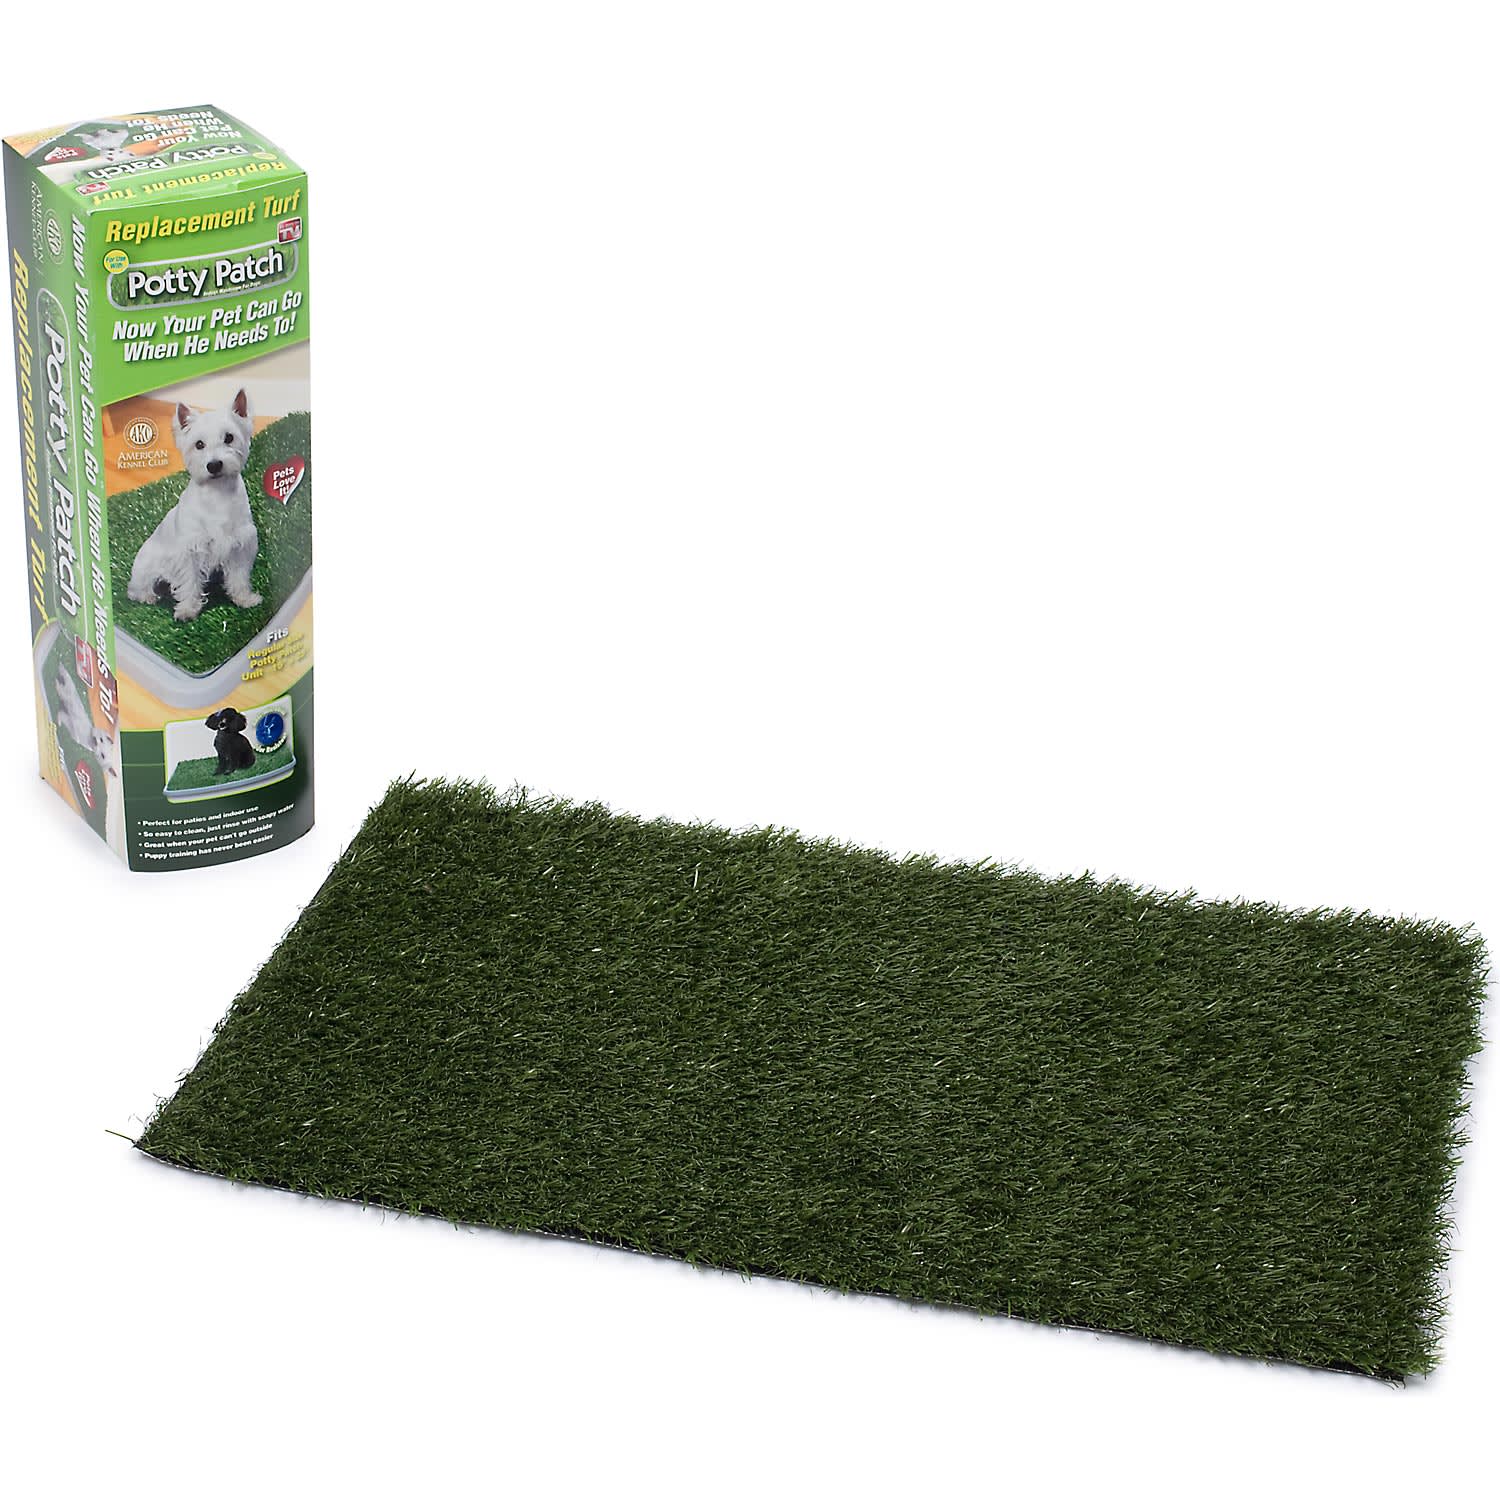 Potty Patch Replacement Turf - As Seen on TV